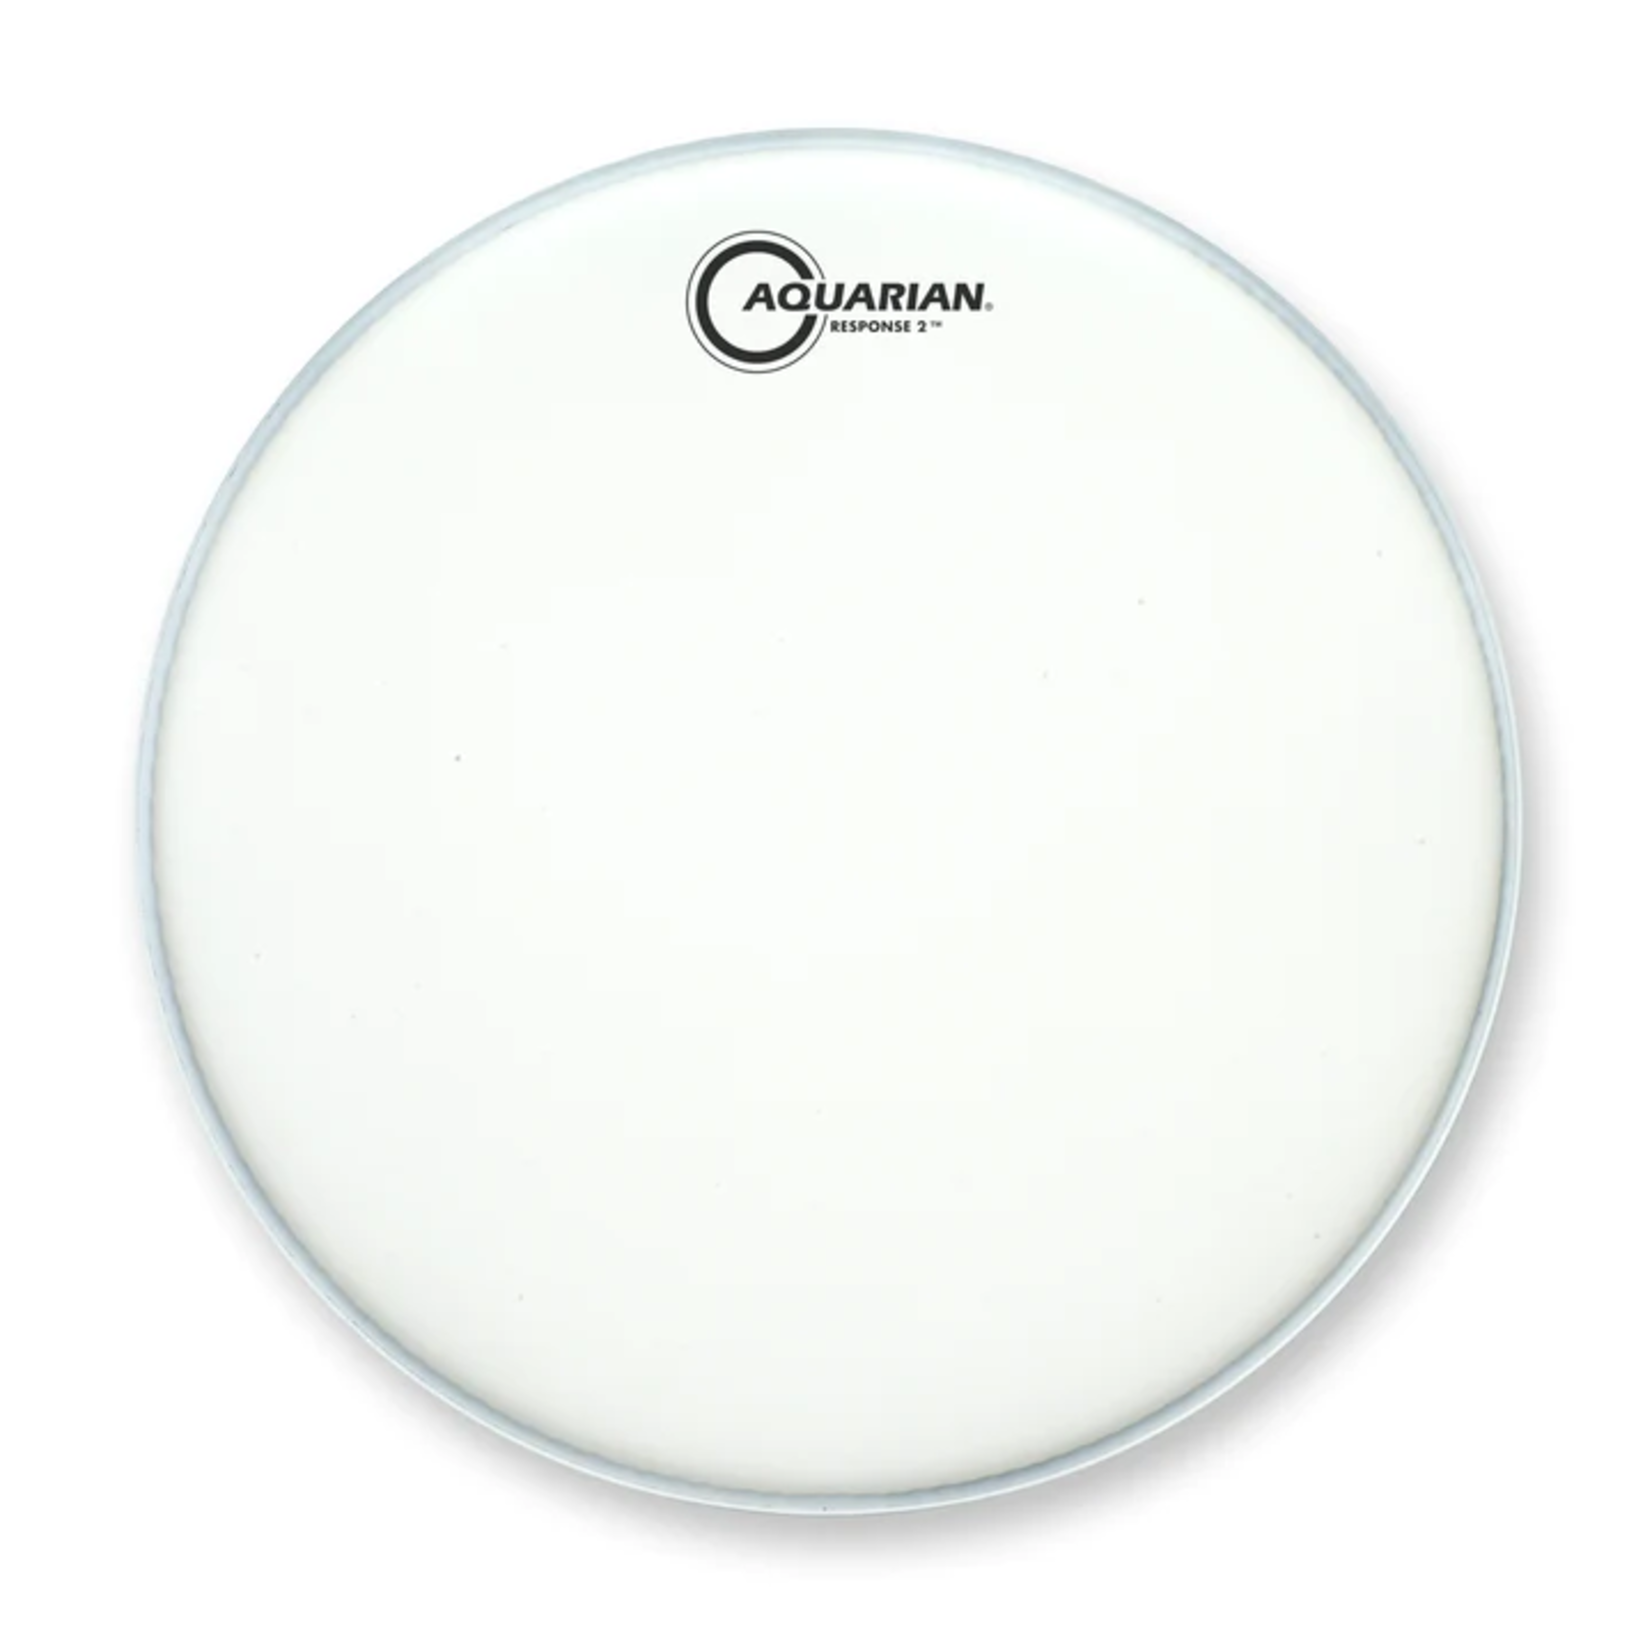 Aquarian Aquarian Response 2 White 7/7 Coated 14" Snare Drum Batter with Power Dot